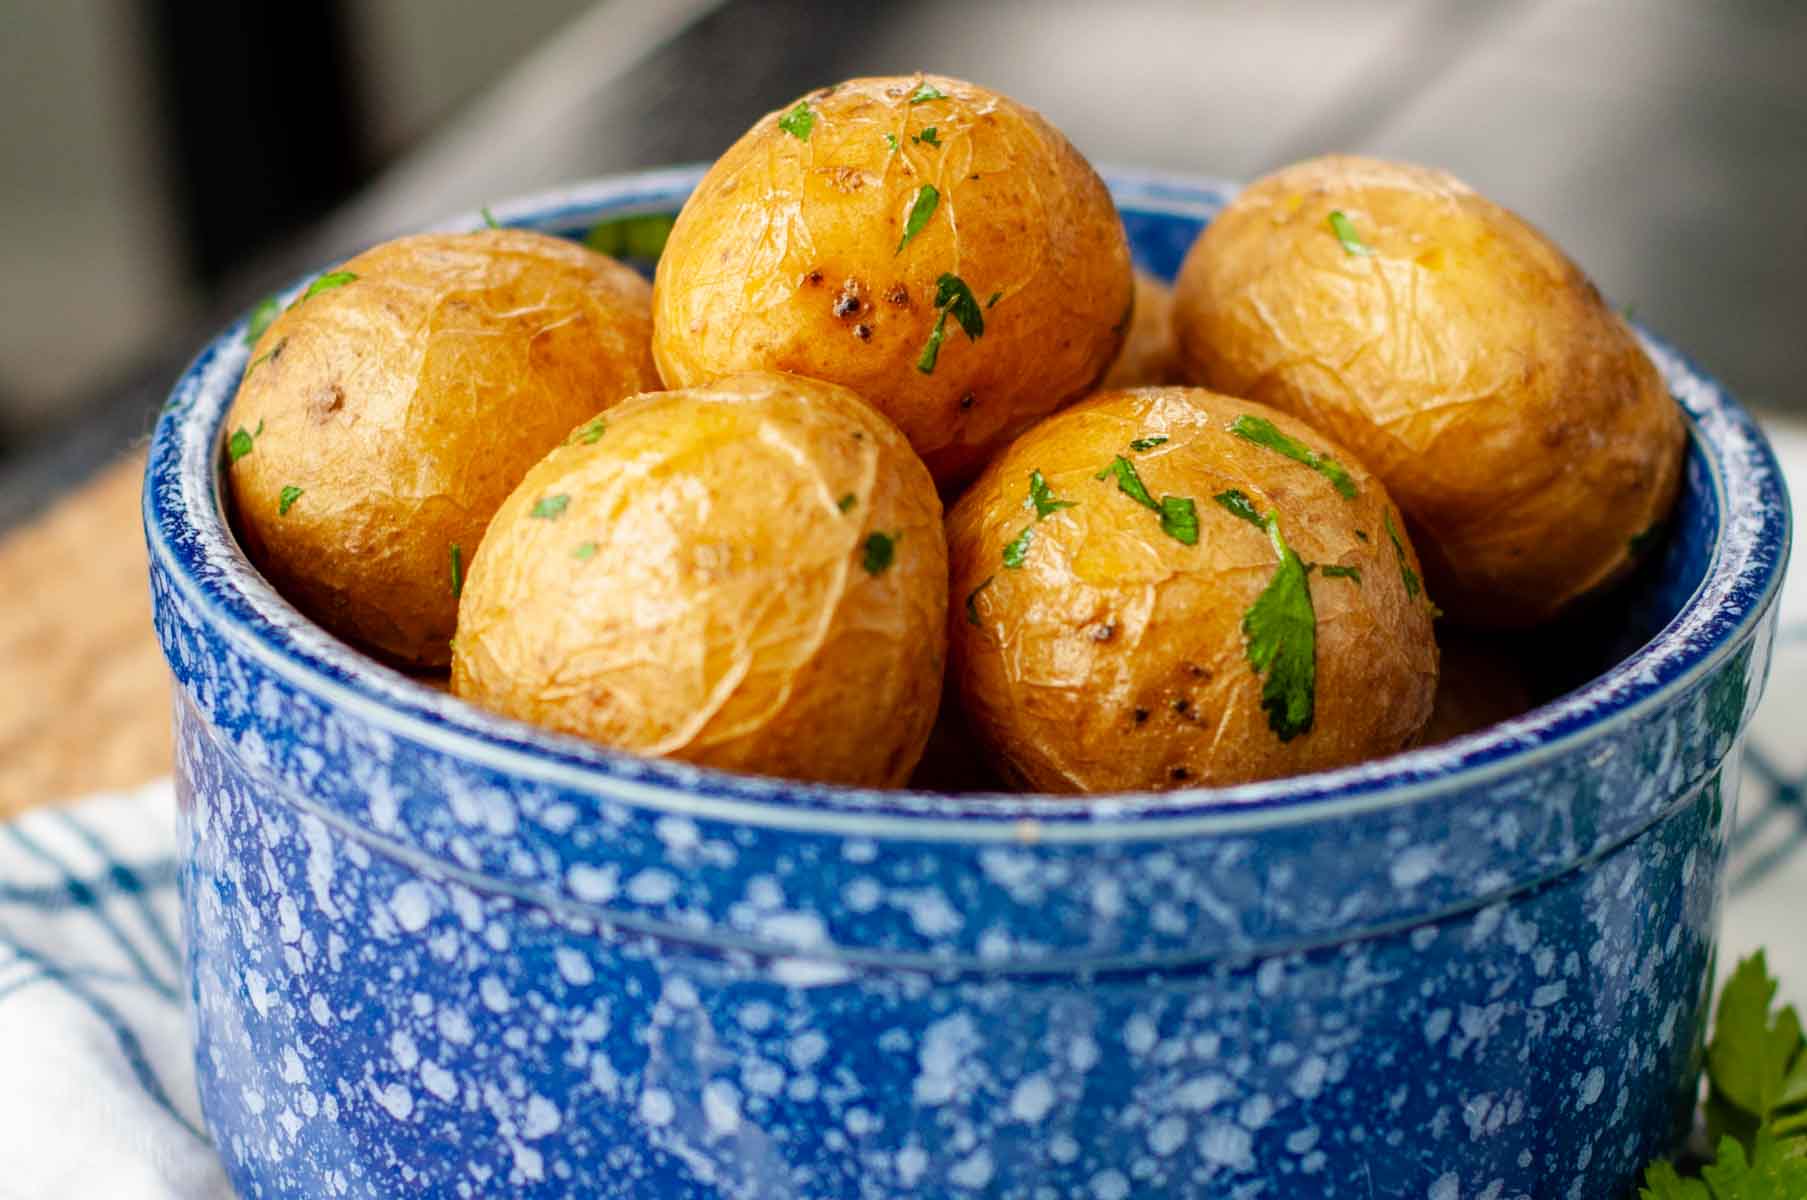 a pile of potatoes in a blue bowl with parsley sprinkled on top